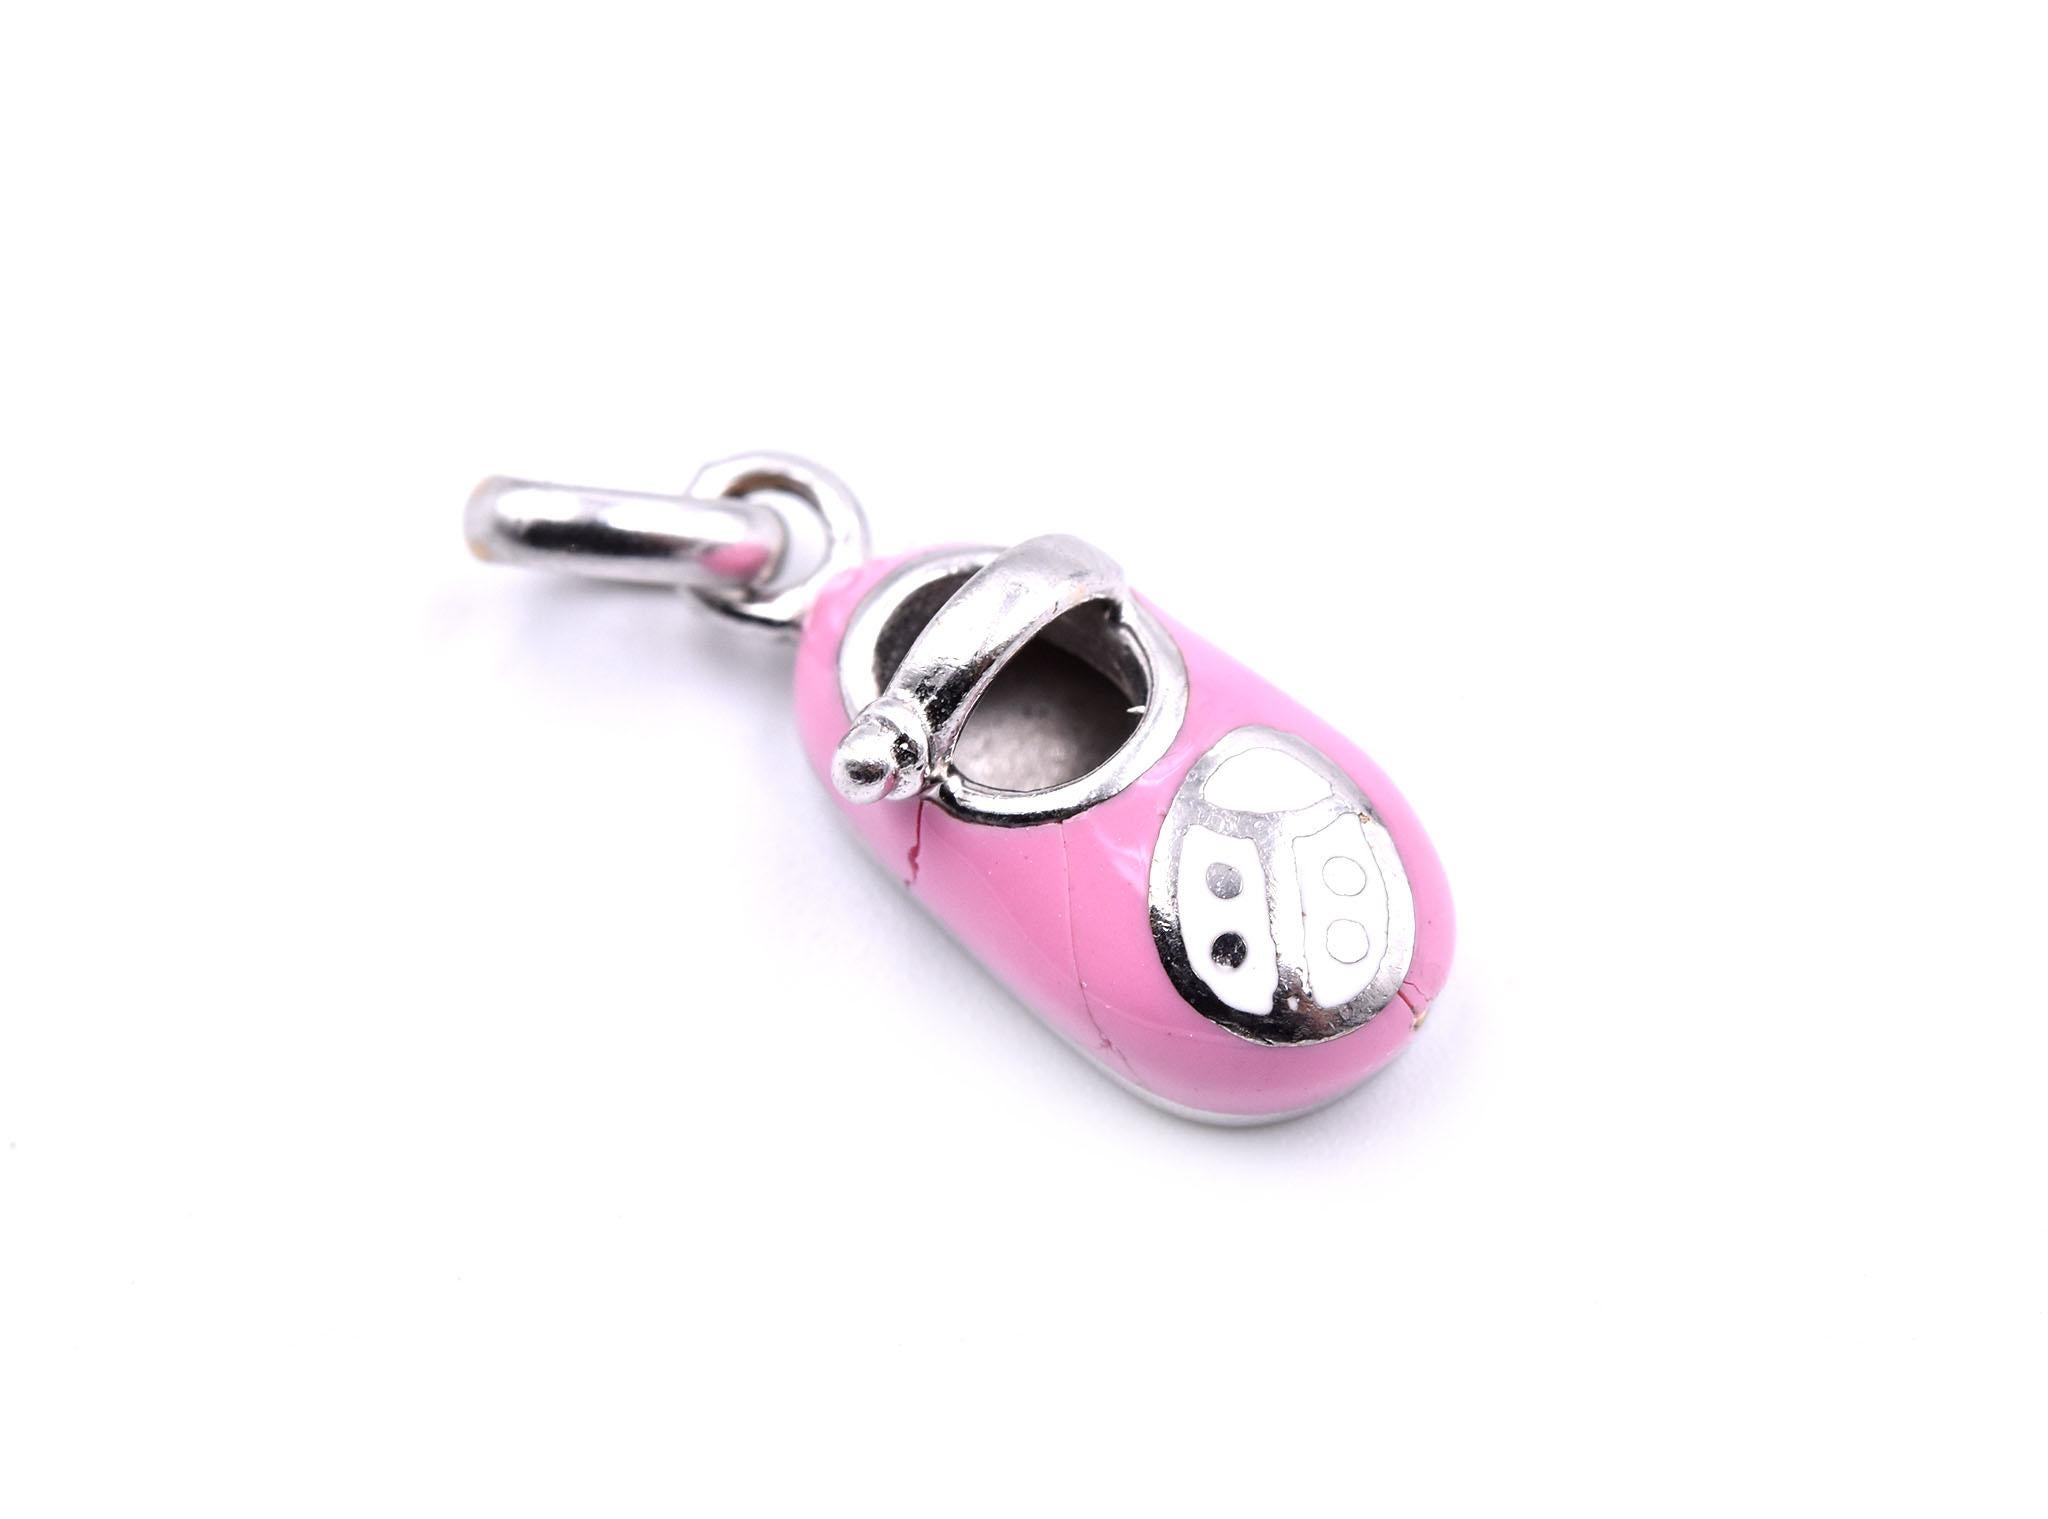 Designer: custom design
Material: 14k yellow gold & pink enamel
Dimensions: charm is 21mm long and 8.8mm wide
Weight: 2.9 grams
